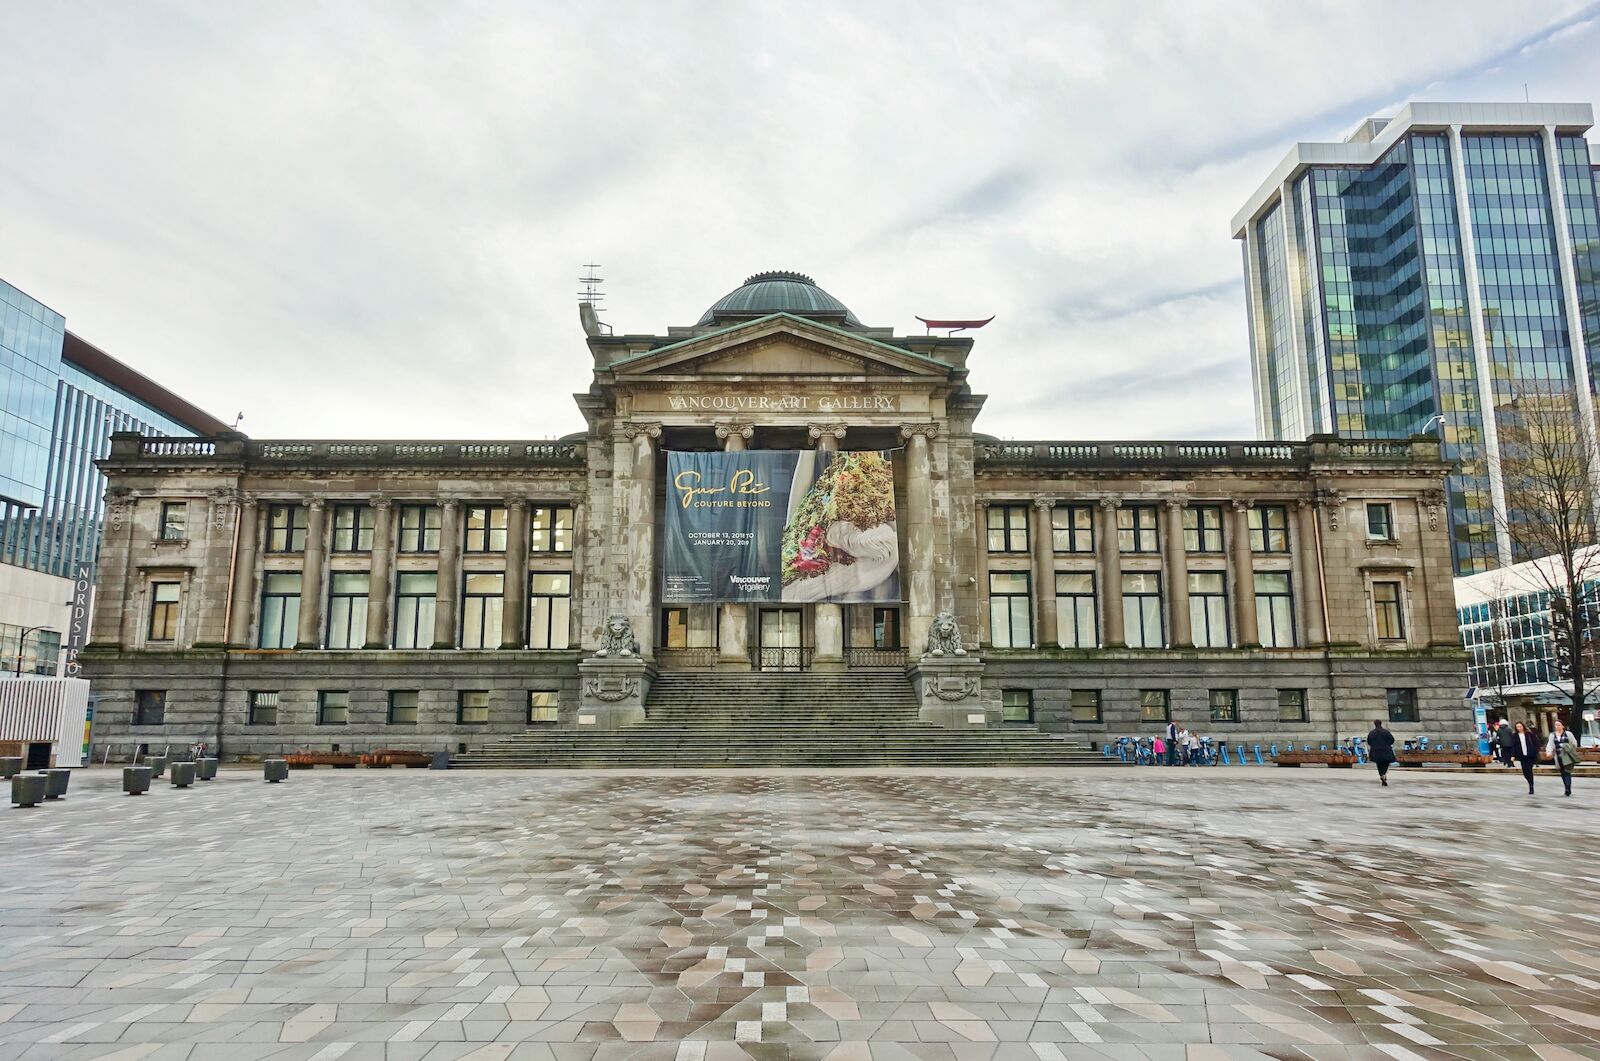 View of the Vancouver Art Gallery, one of the best museums in Vancouver